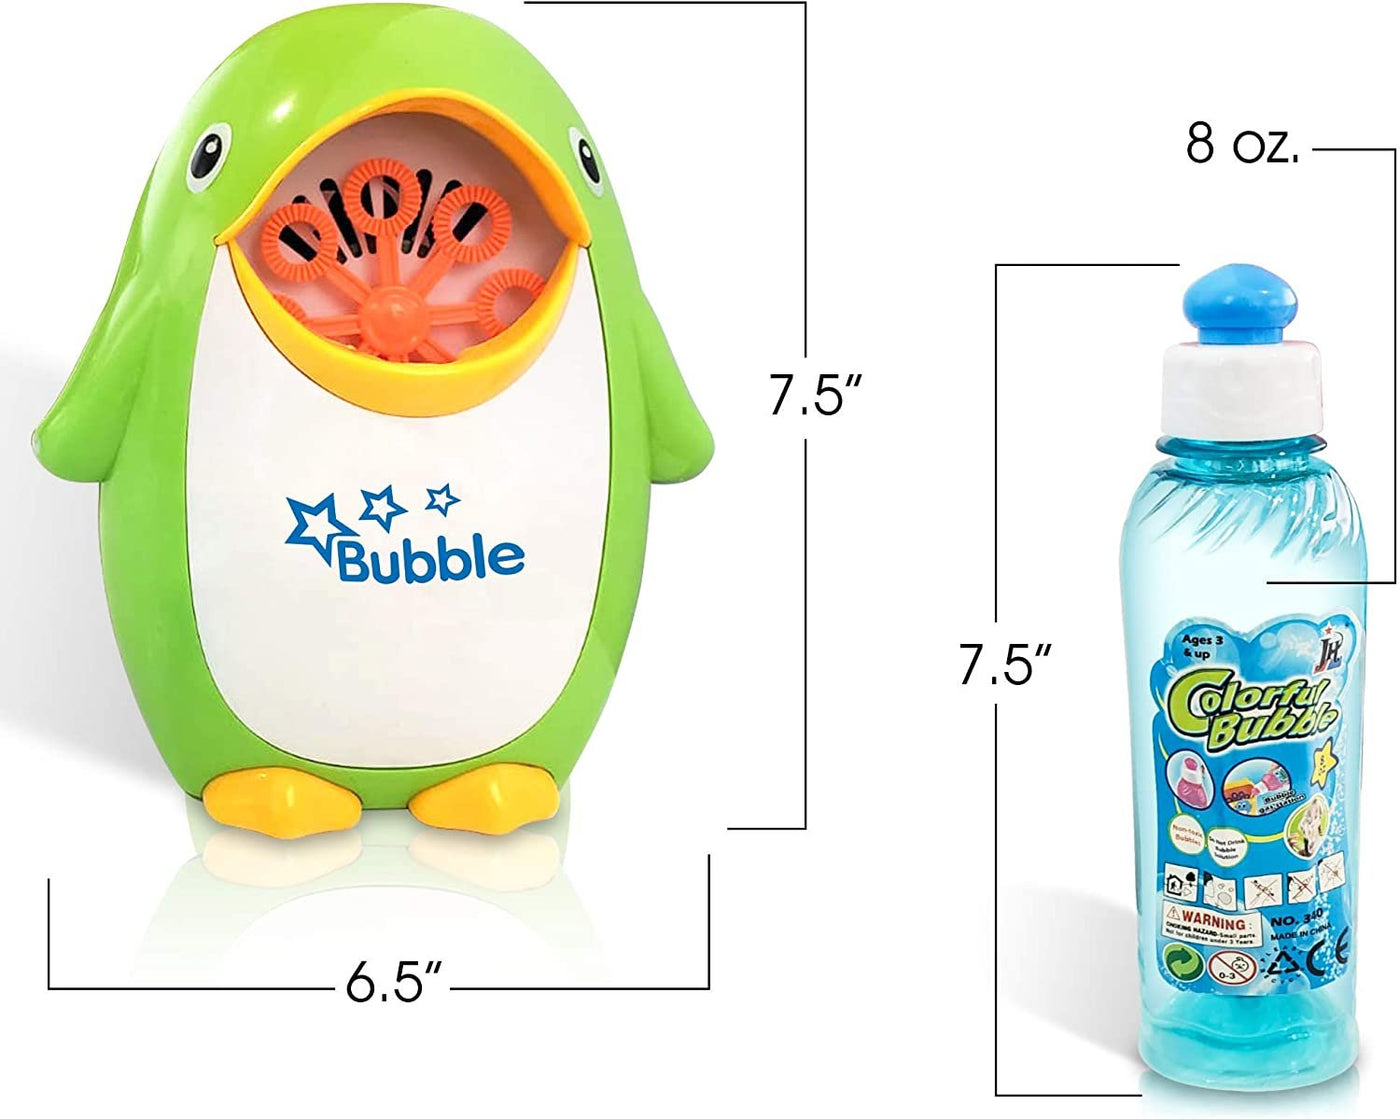 Penguin Bubble Machine with 8oz Bubble Solution, Cute Powerful Automatic Bubble Maker Toy for Kids and Parties, Simple and Easy to Use, Best for Wedding, Birthday Party, DJ, Baby Shower